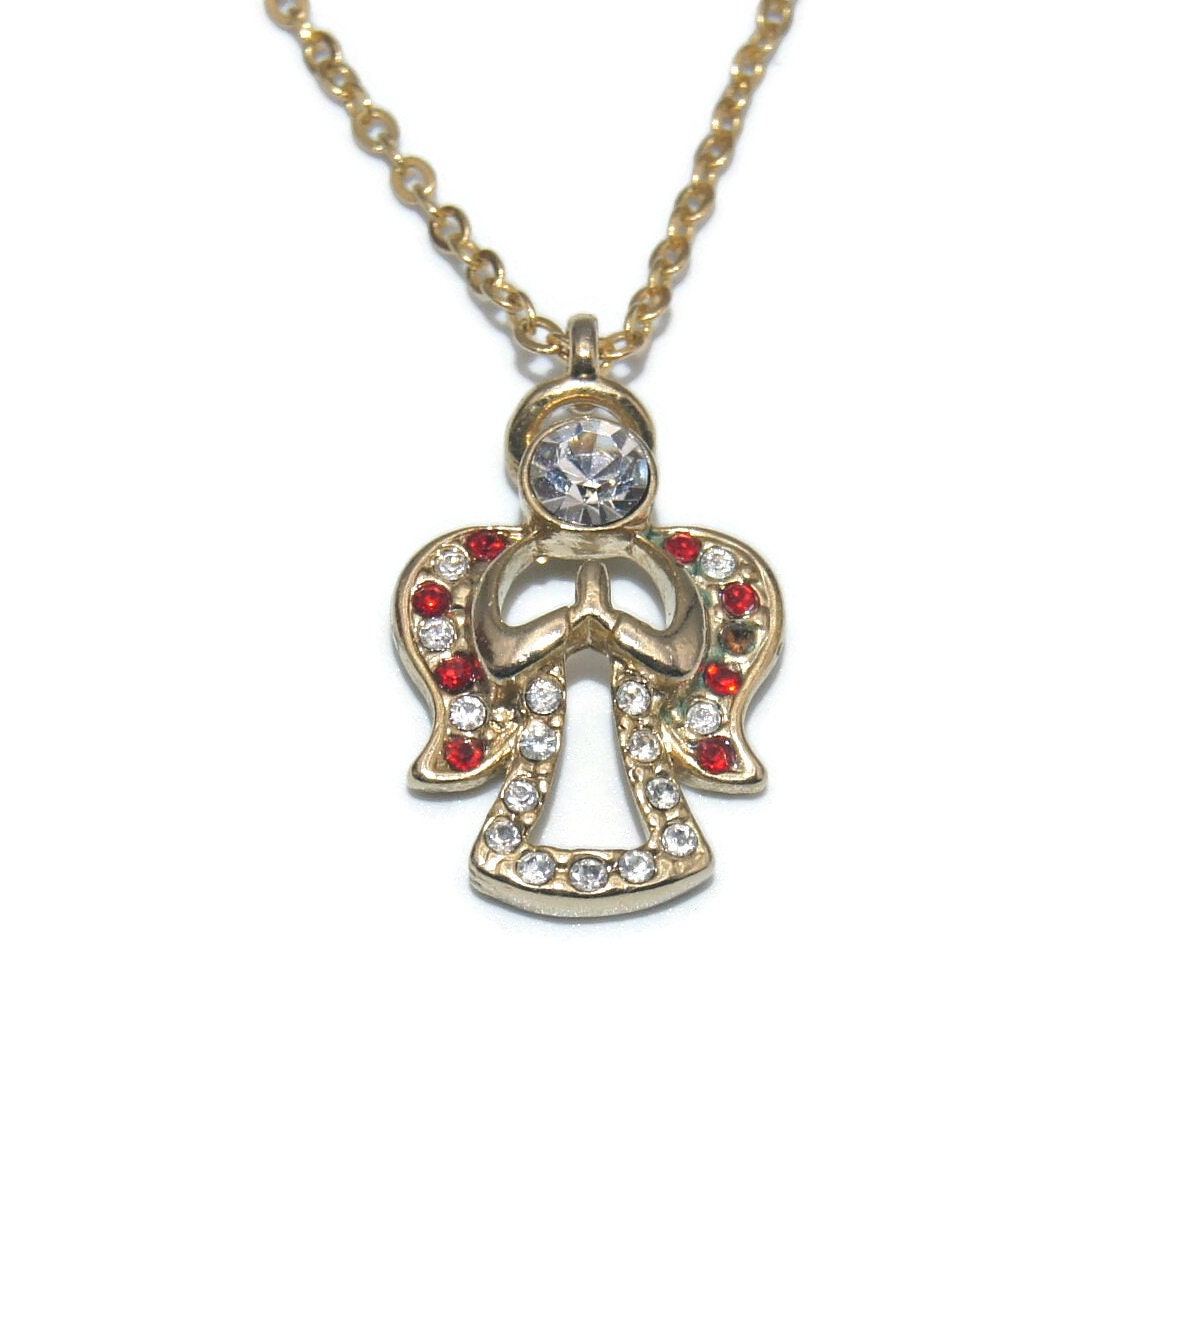 Vintage 1980s Danbury Inch Tone Mint Hallmark. DM on Pendant Tone . Ring Chain Rhinestones Clear, With Etsy Spring - With Angel Clasp Red 18 Gold